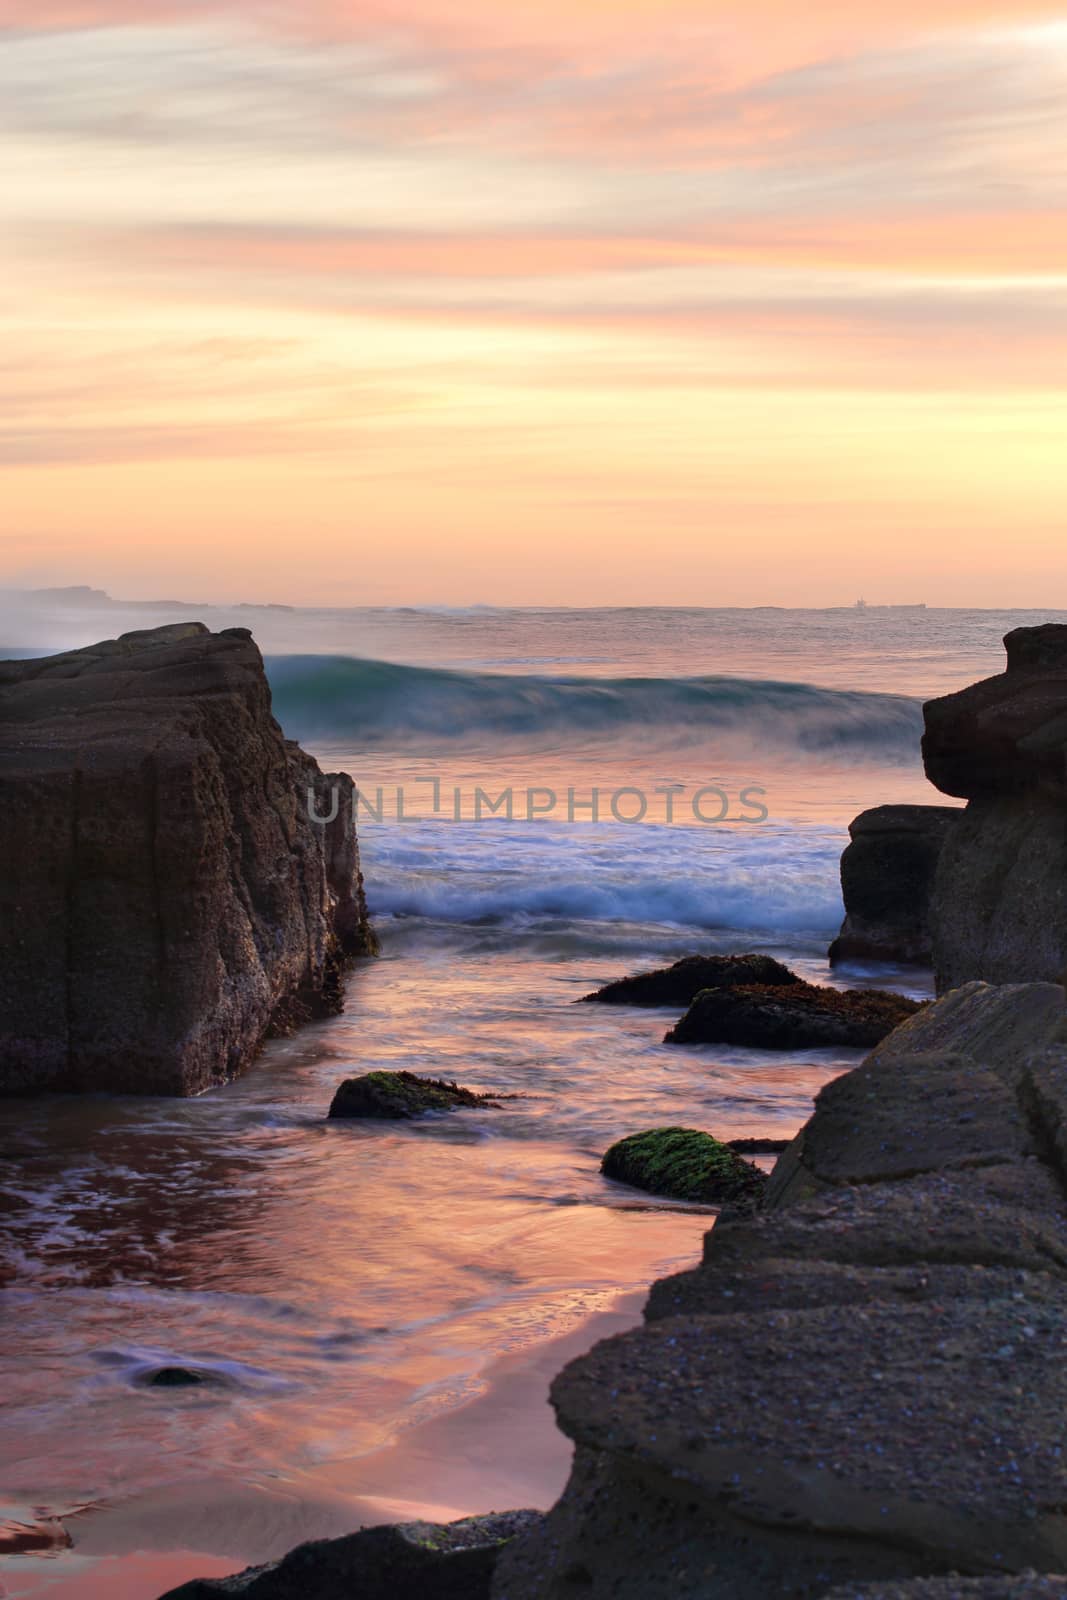 Beautiful colours in the wispy wind swept sky and tidal waves wash in between rocks on the beach